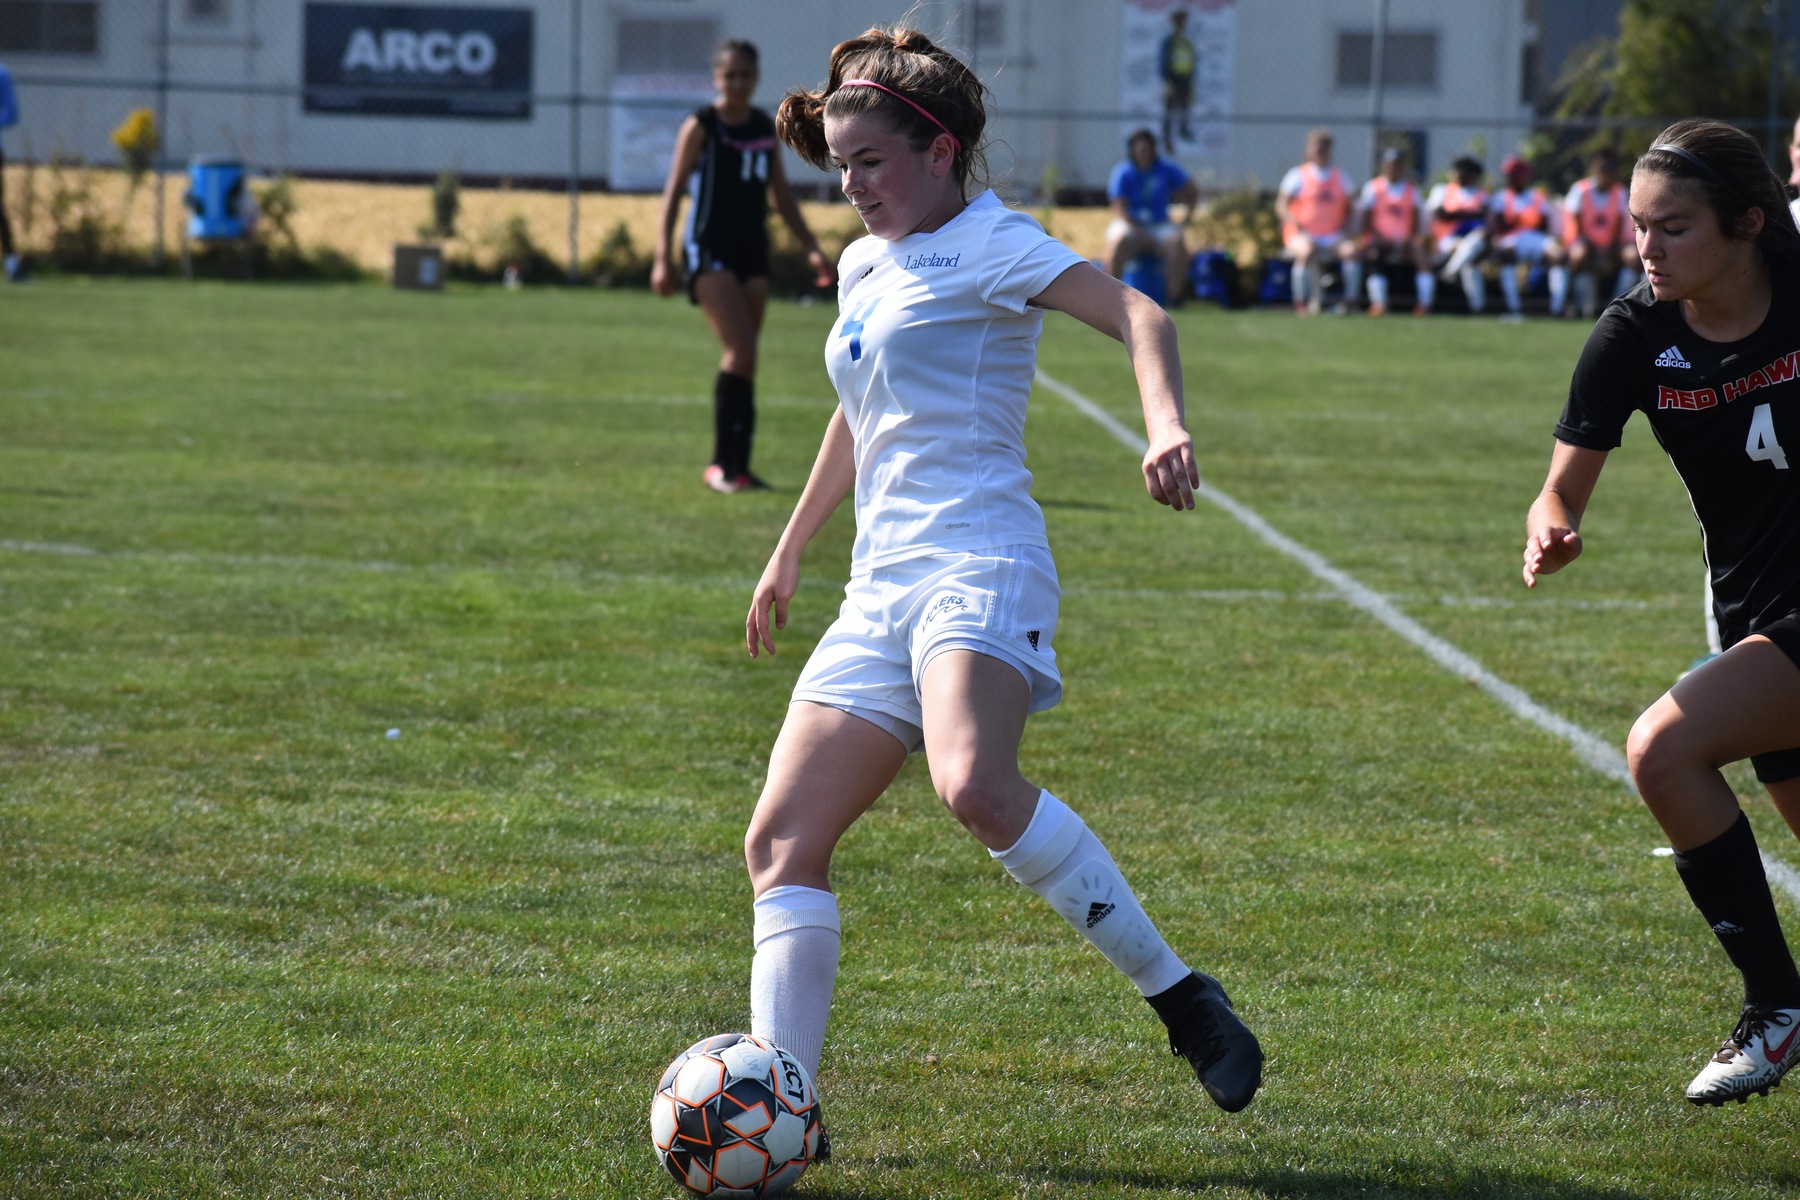 Lakers women’s soccer rolls Commodores